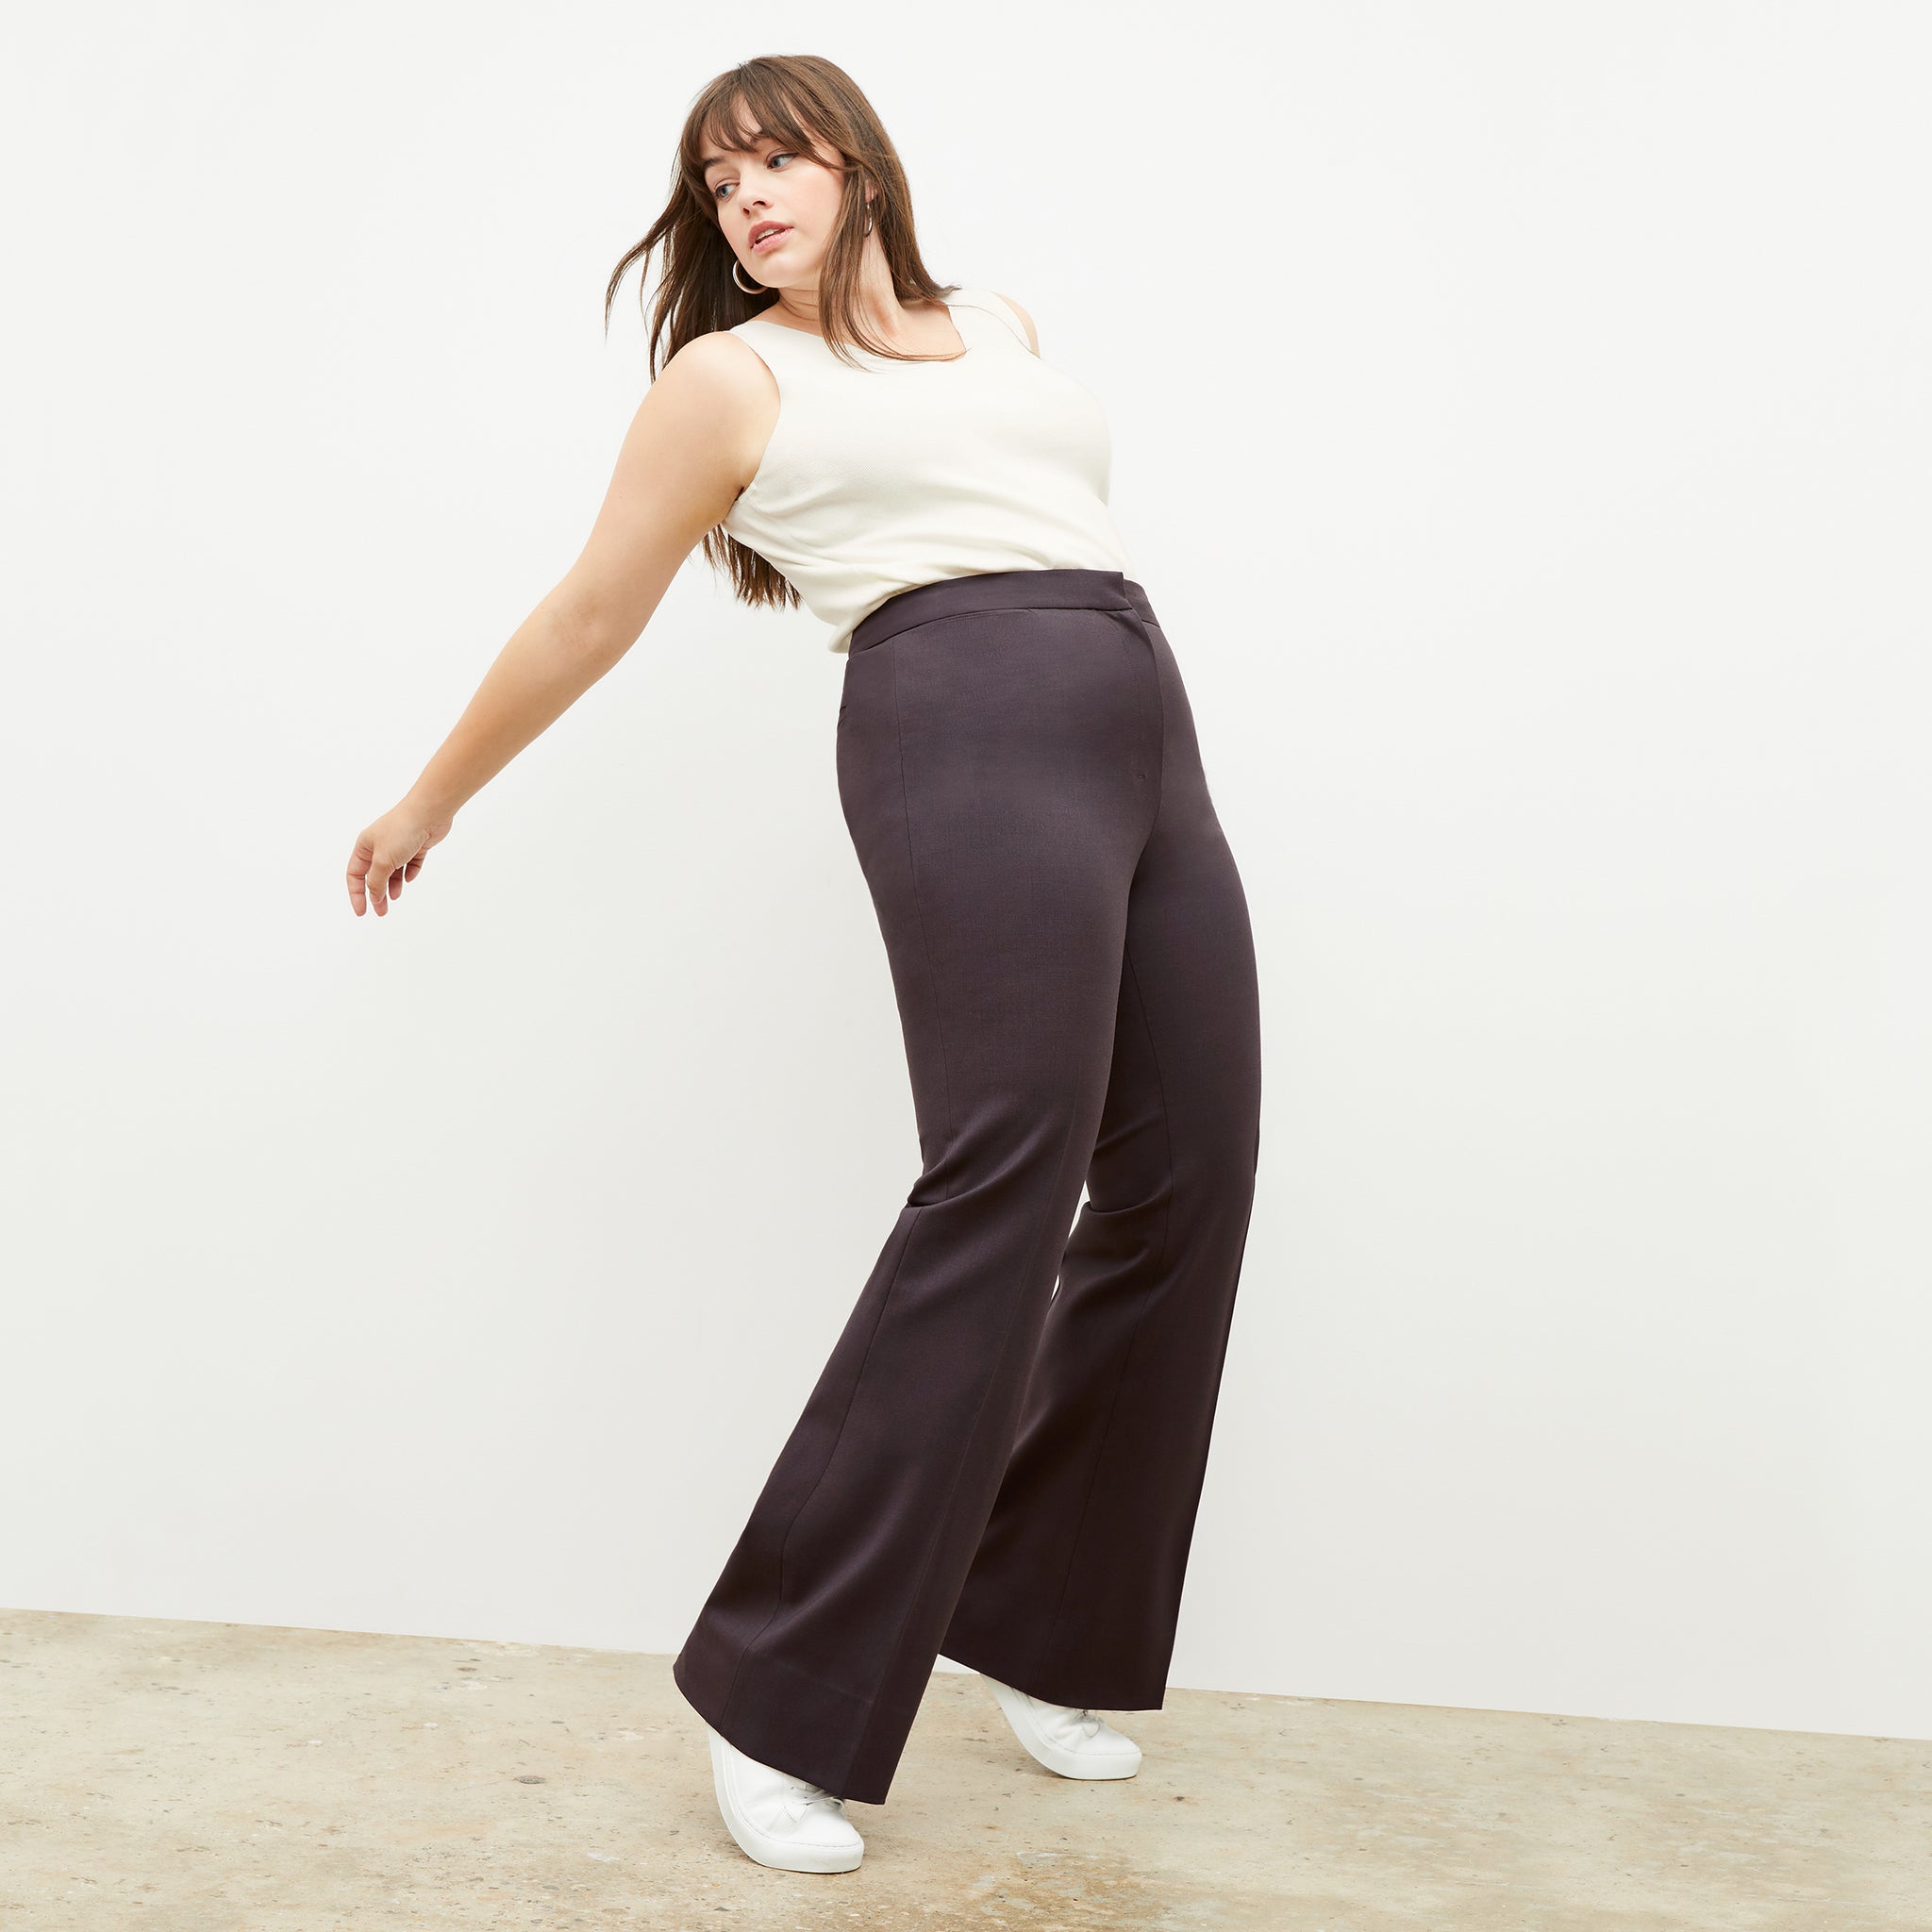 image of a woman wearing the Horton Pant in Haze